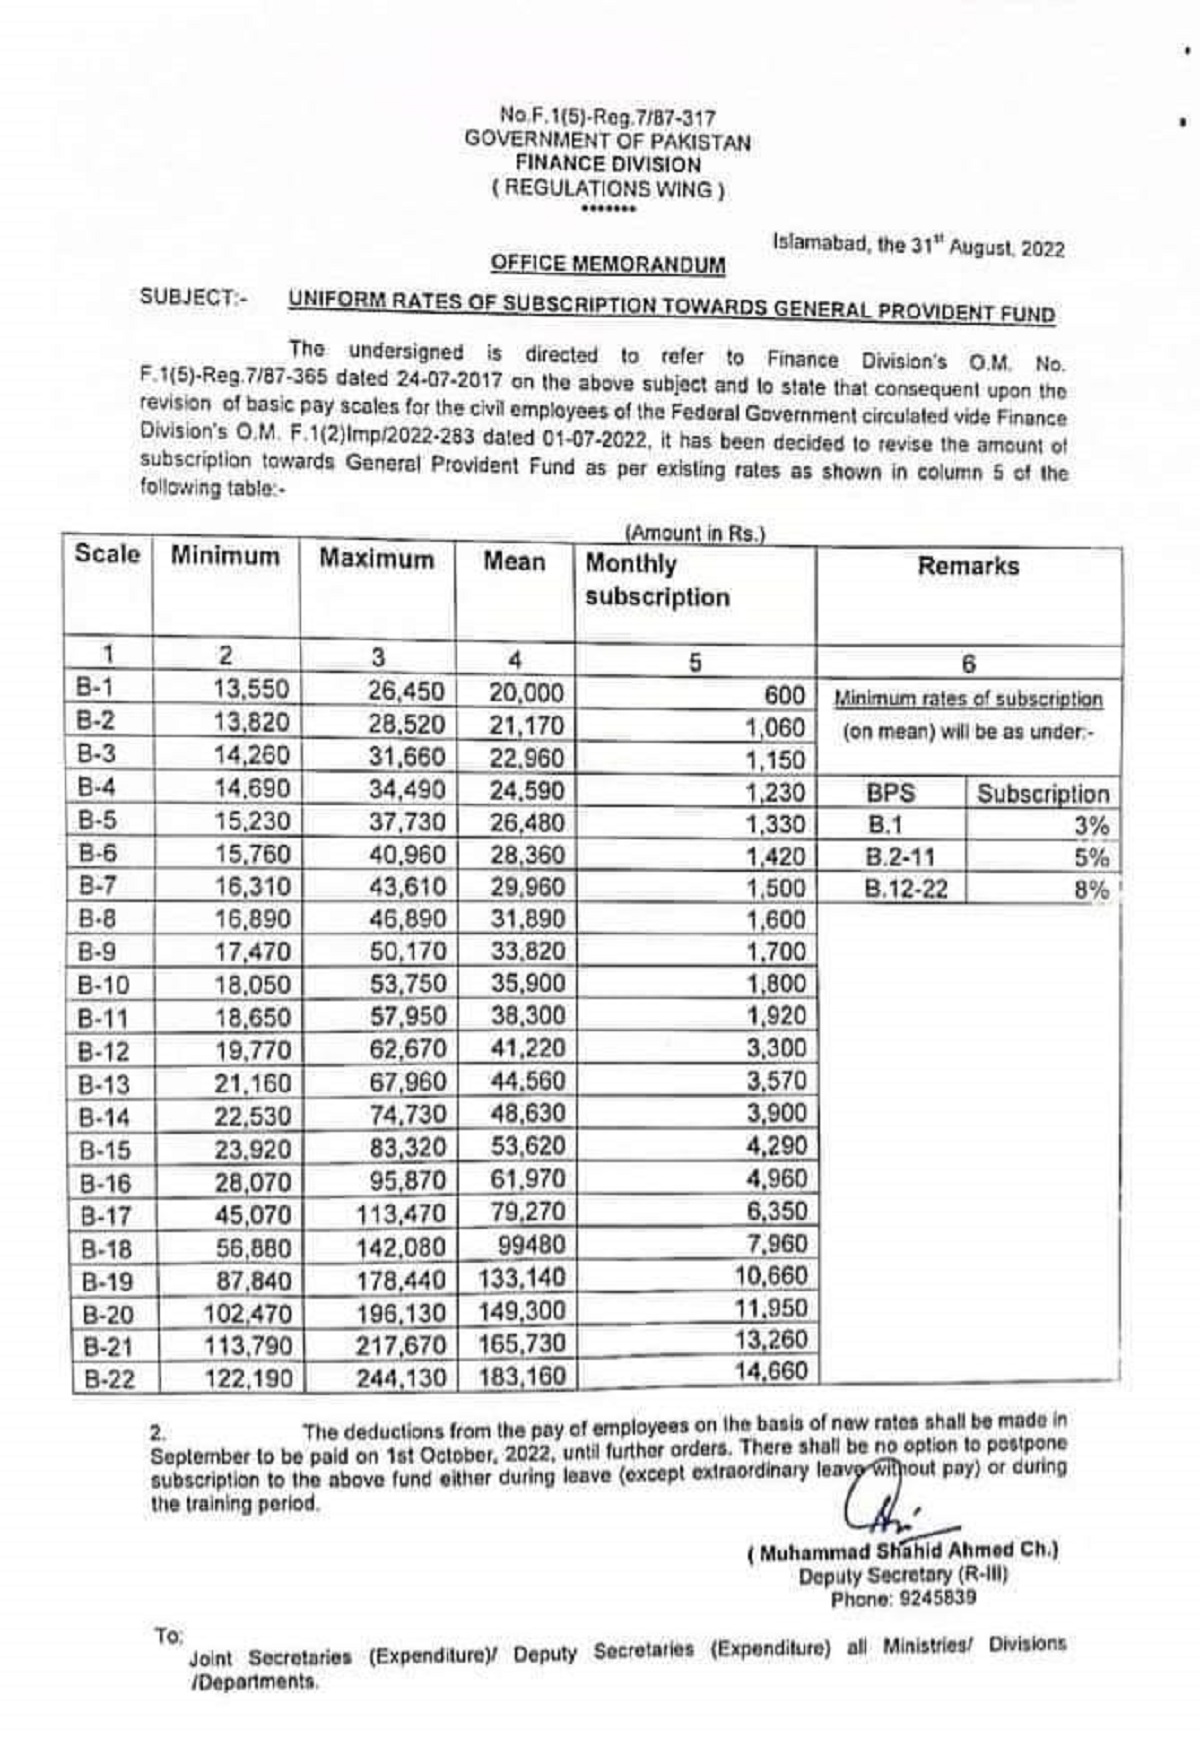 Uniform Rates of Subscription towards General Provident Fund 2022